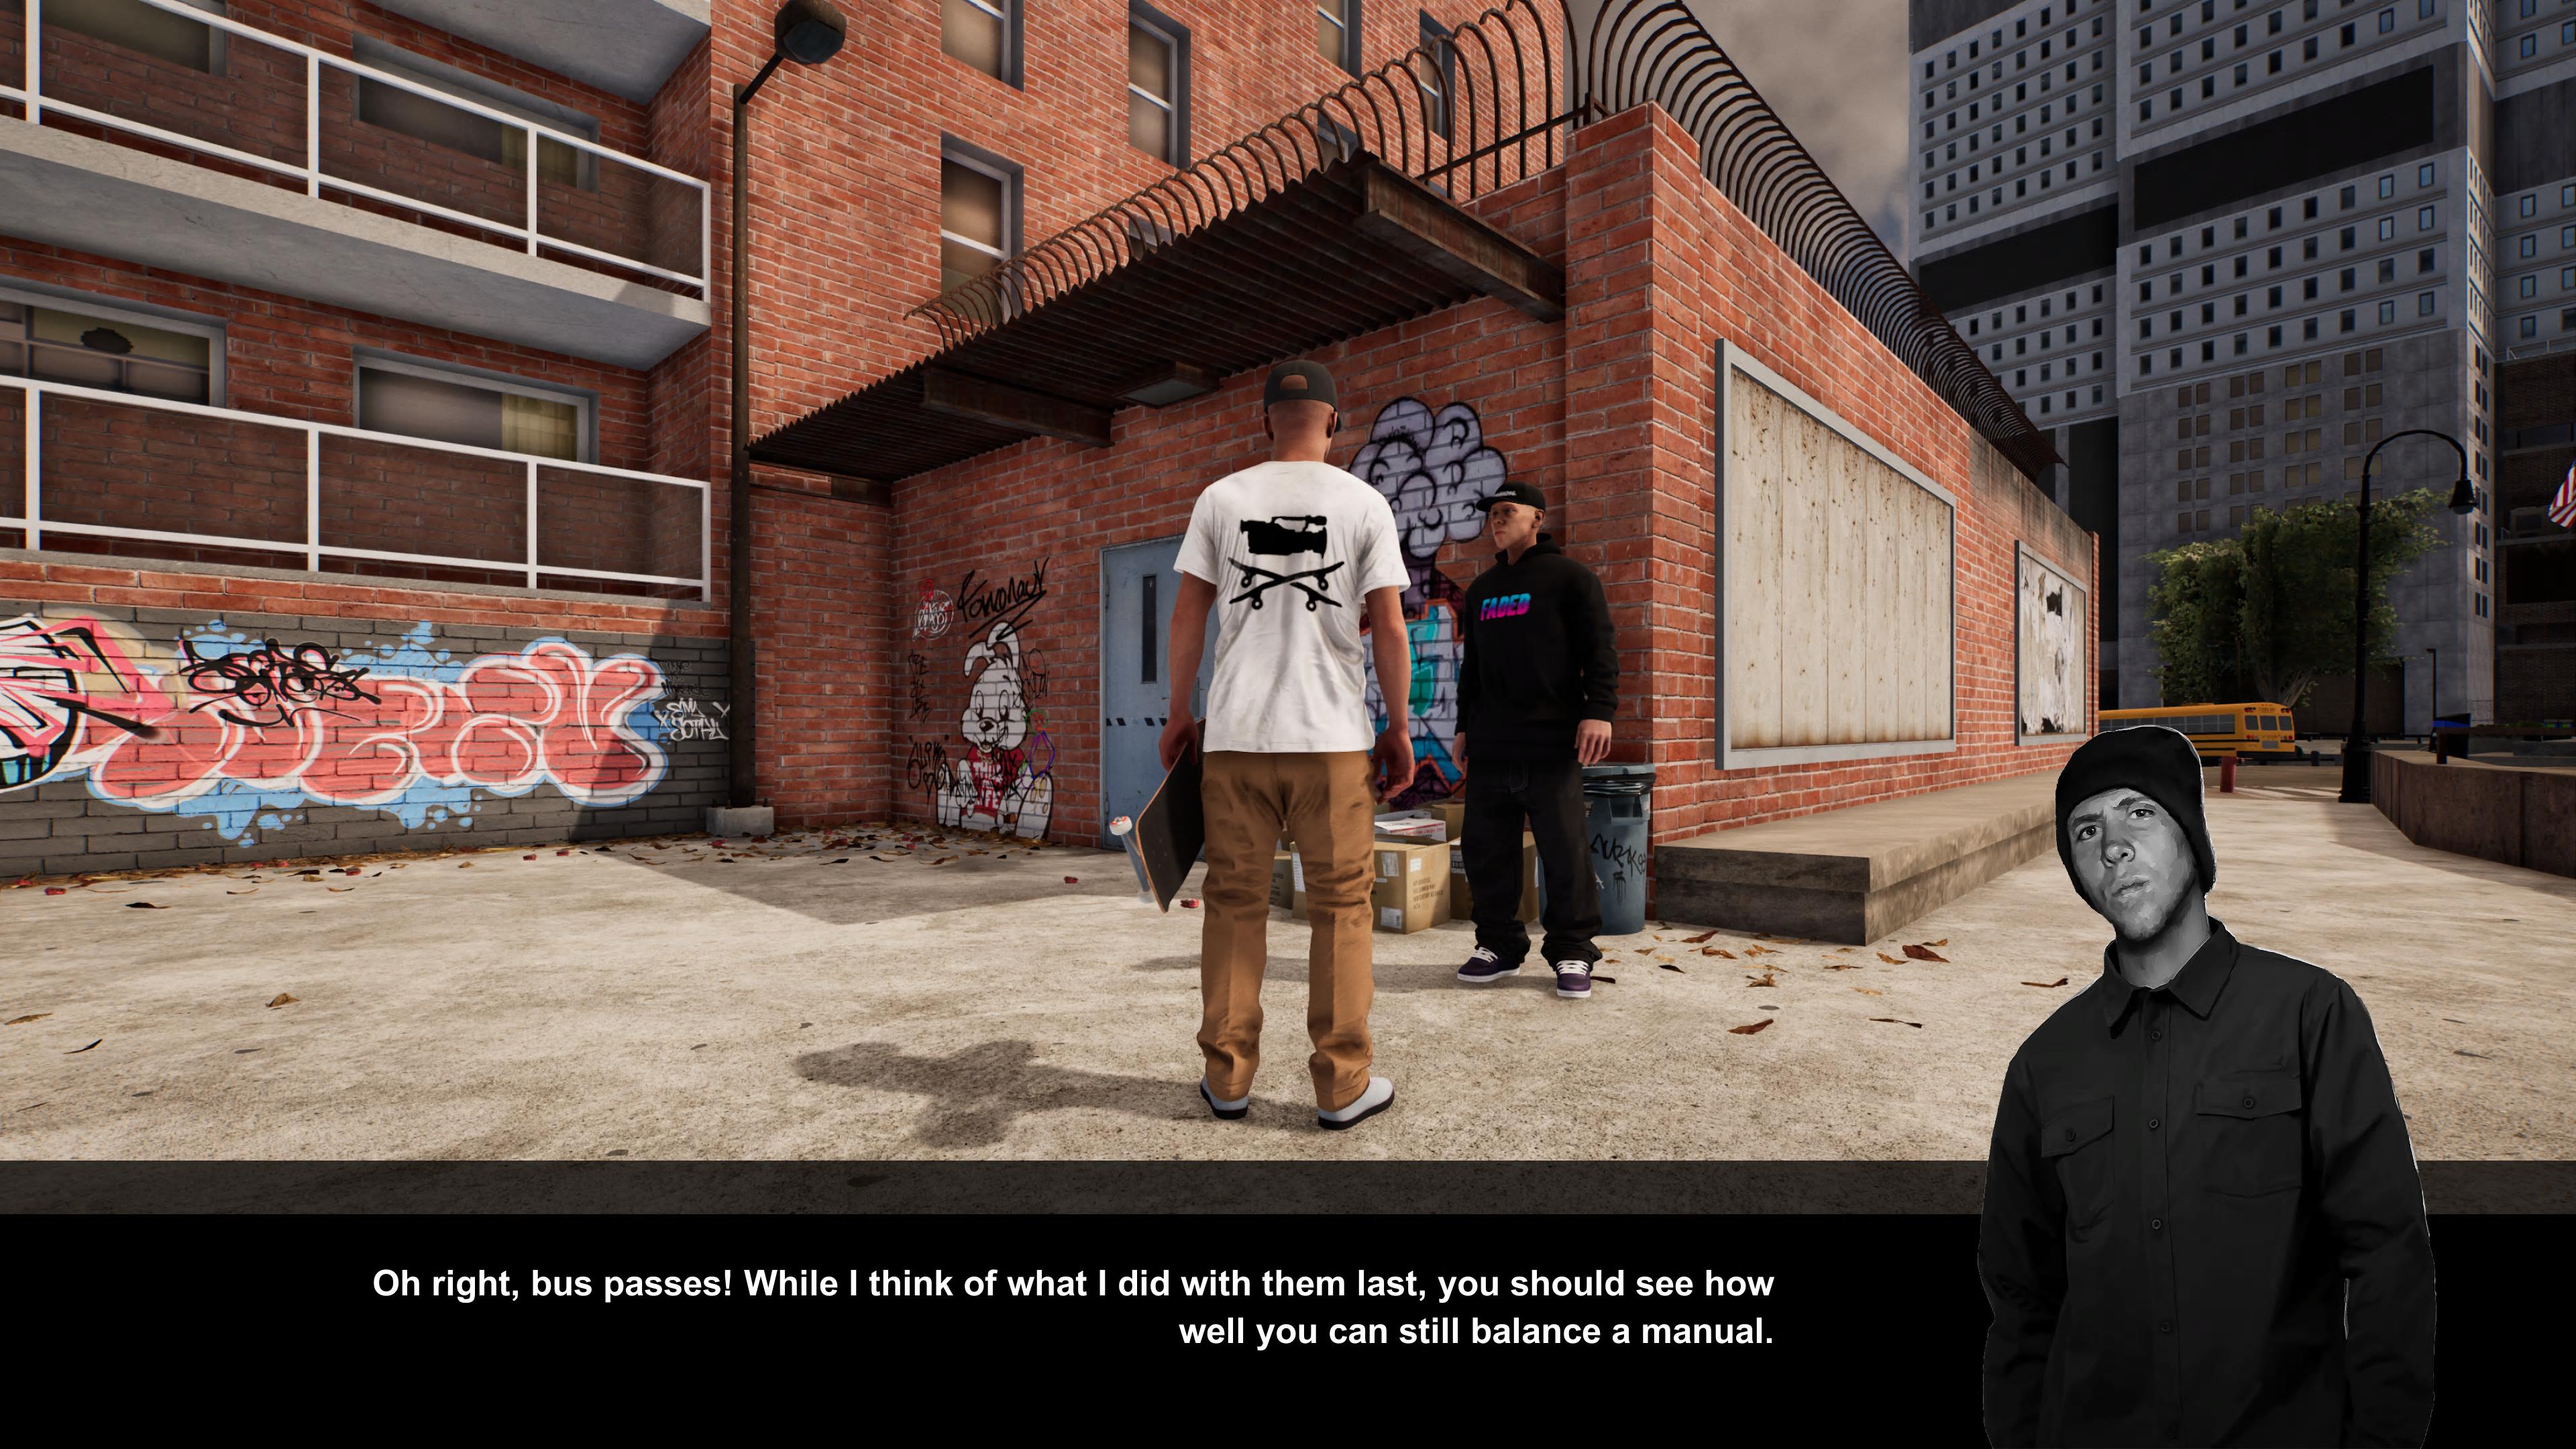 Session Skate Sim Review - Chatting With NPCs Outside Modern Red Brick Buildings